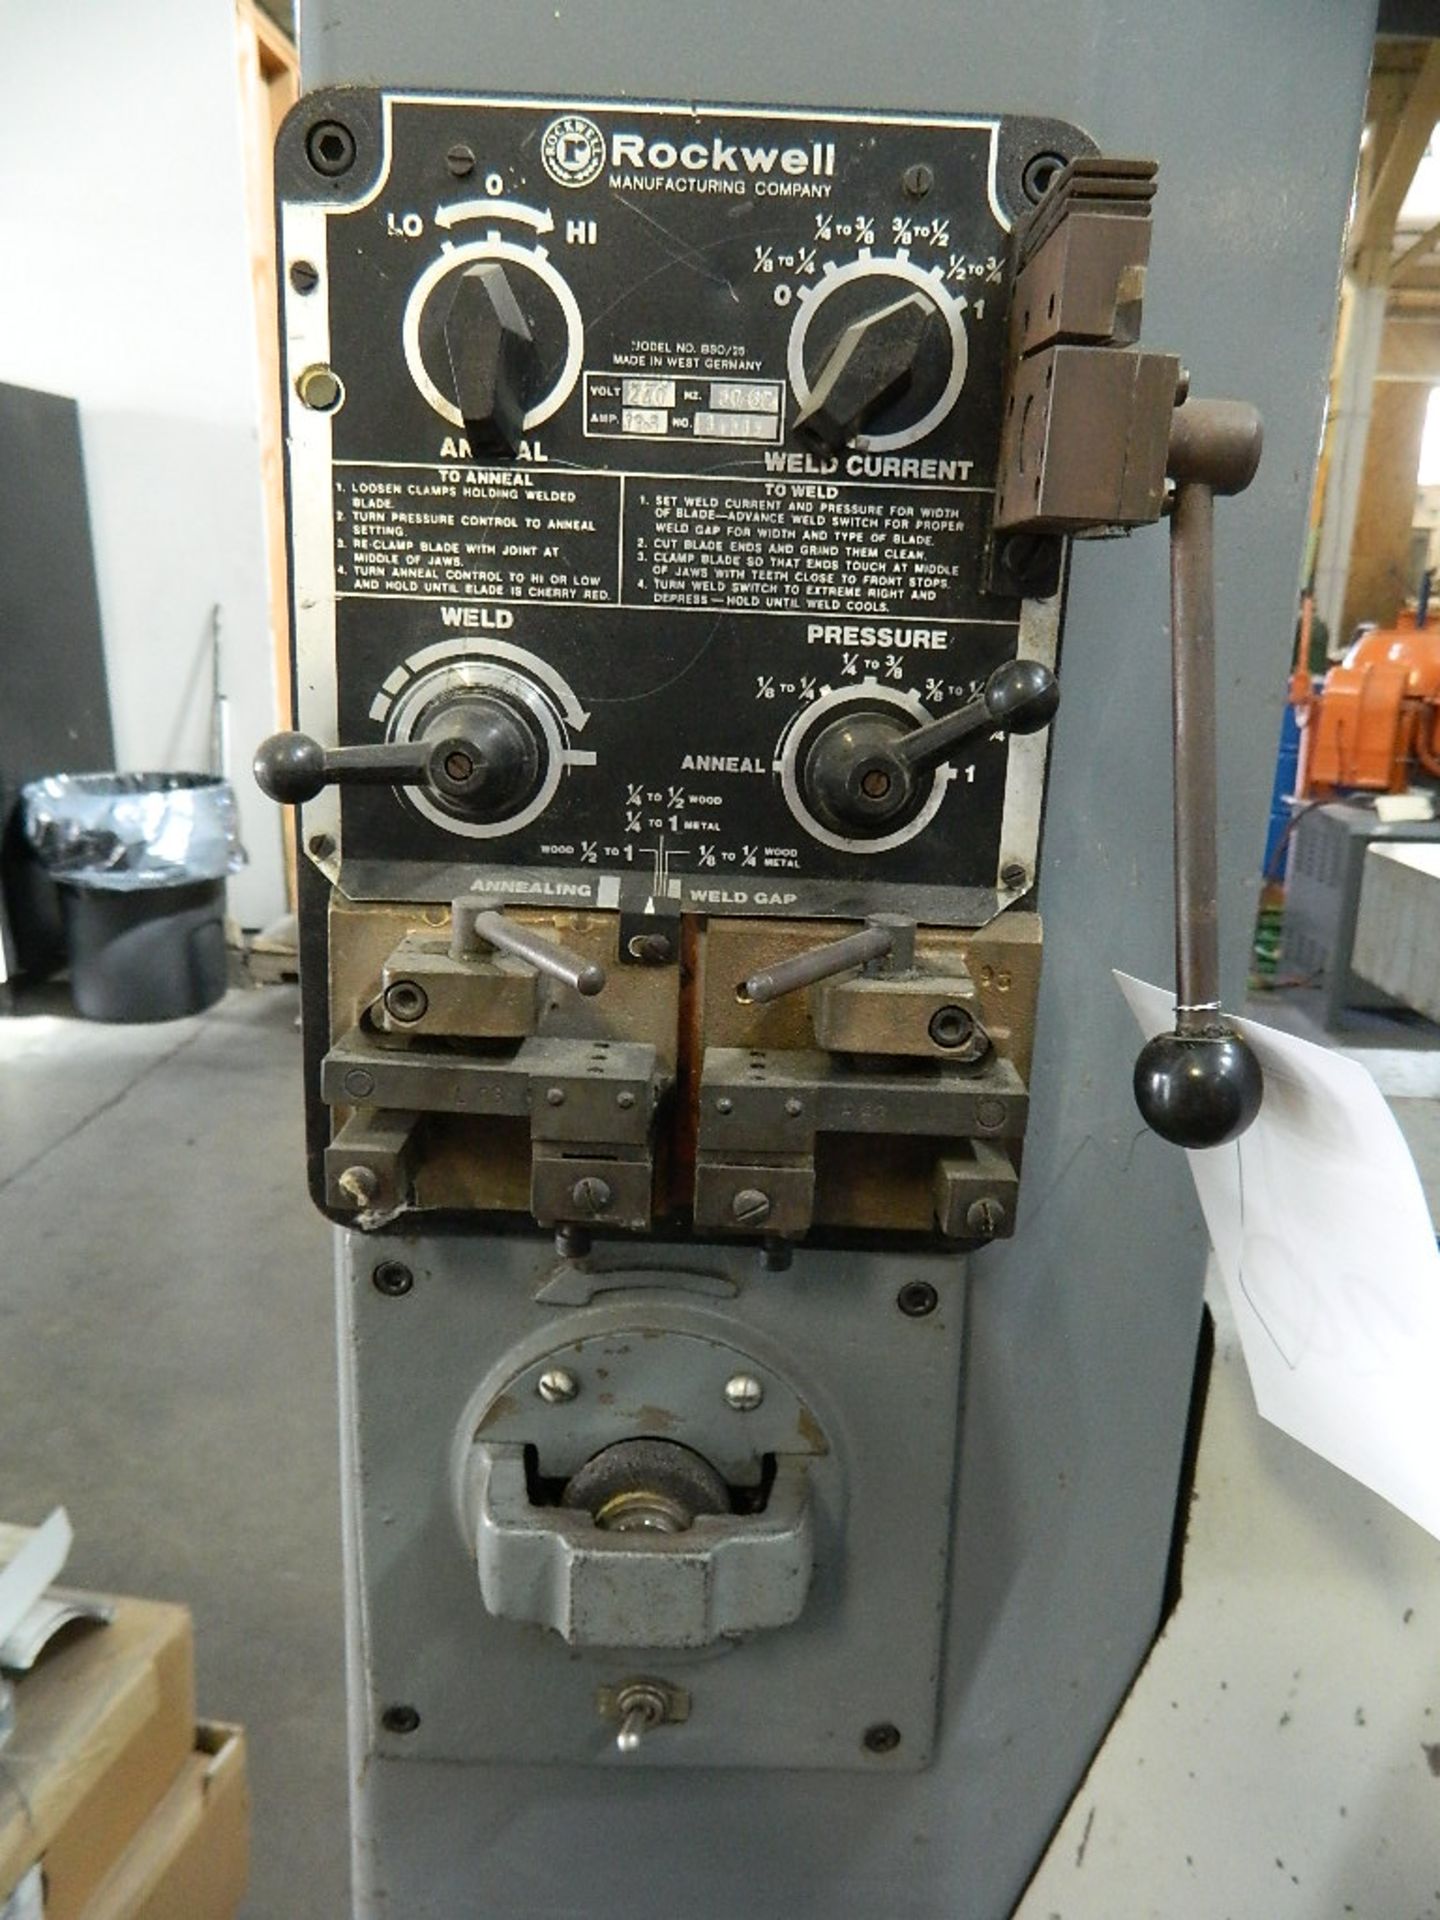 Rockwell Delta Vertical Band Saw model 28-3X5, w 24.1/4"x24.1/4" Table, 20" Throat, Blade Welder, - Image 2 of 4